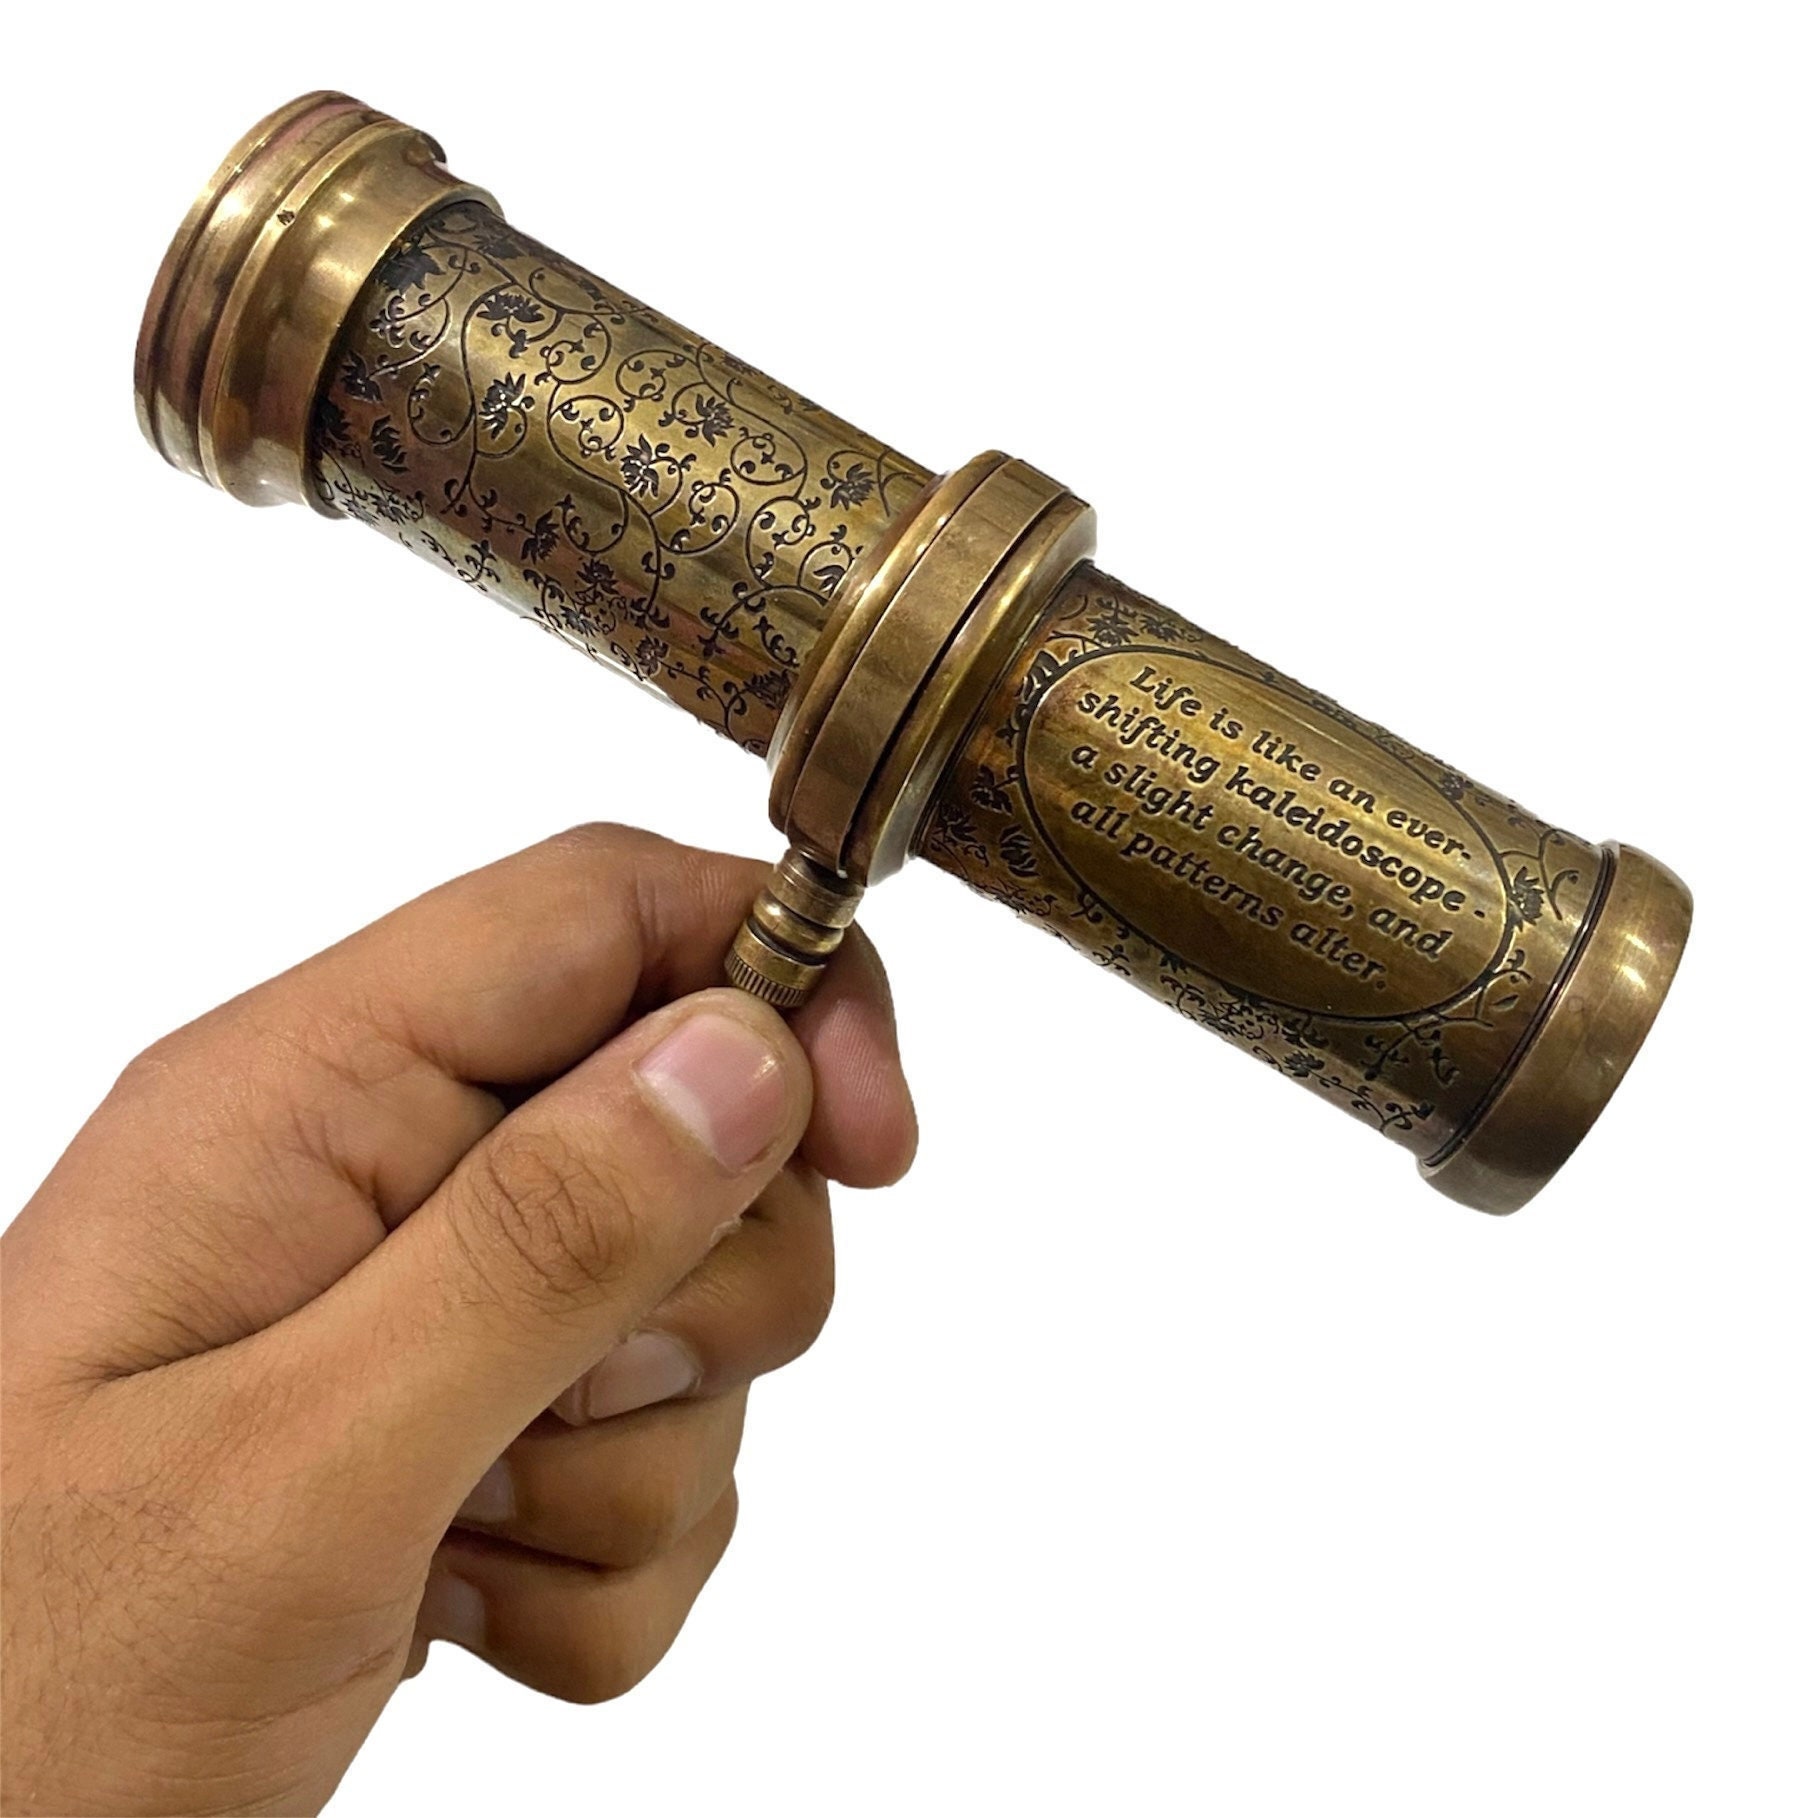 Generic Hassanhandicrafts Vintage Brass Handmade Kaleidoscope for All People Perfect Size Kids Educational 